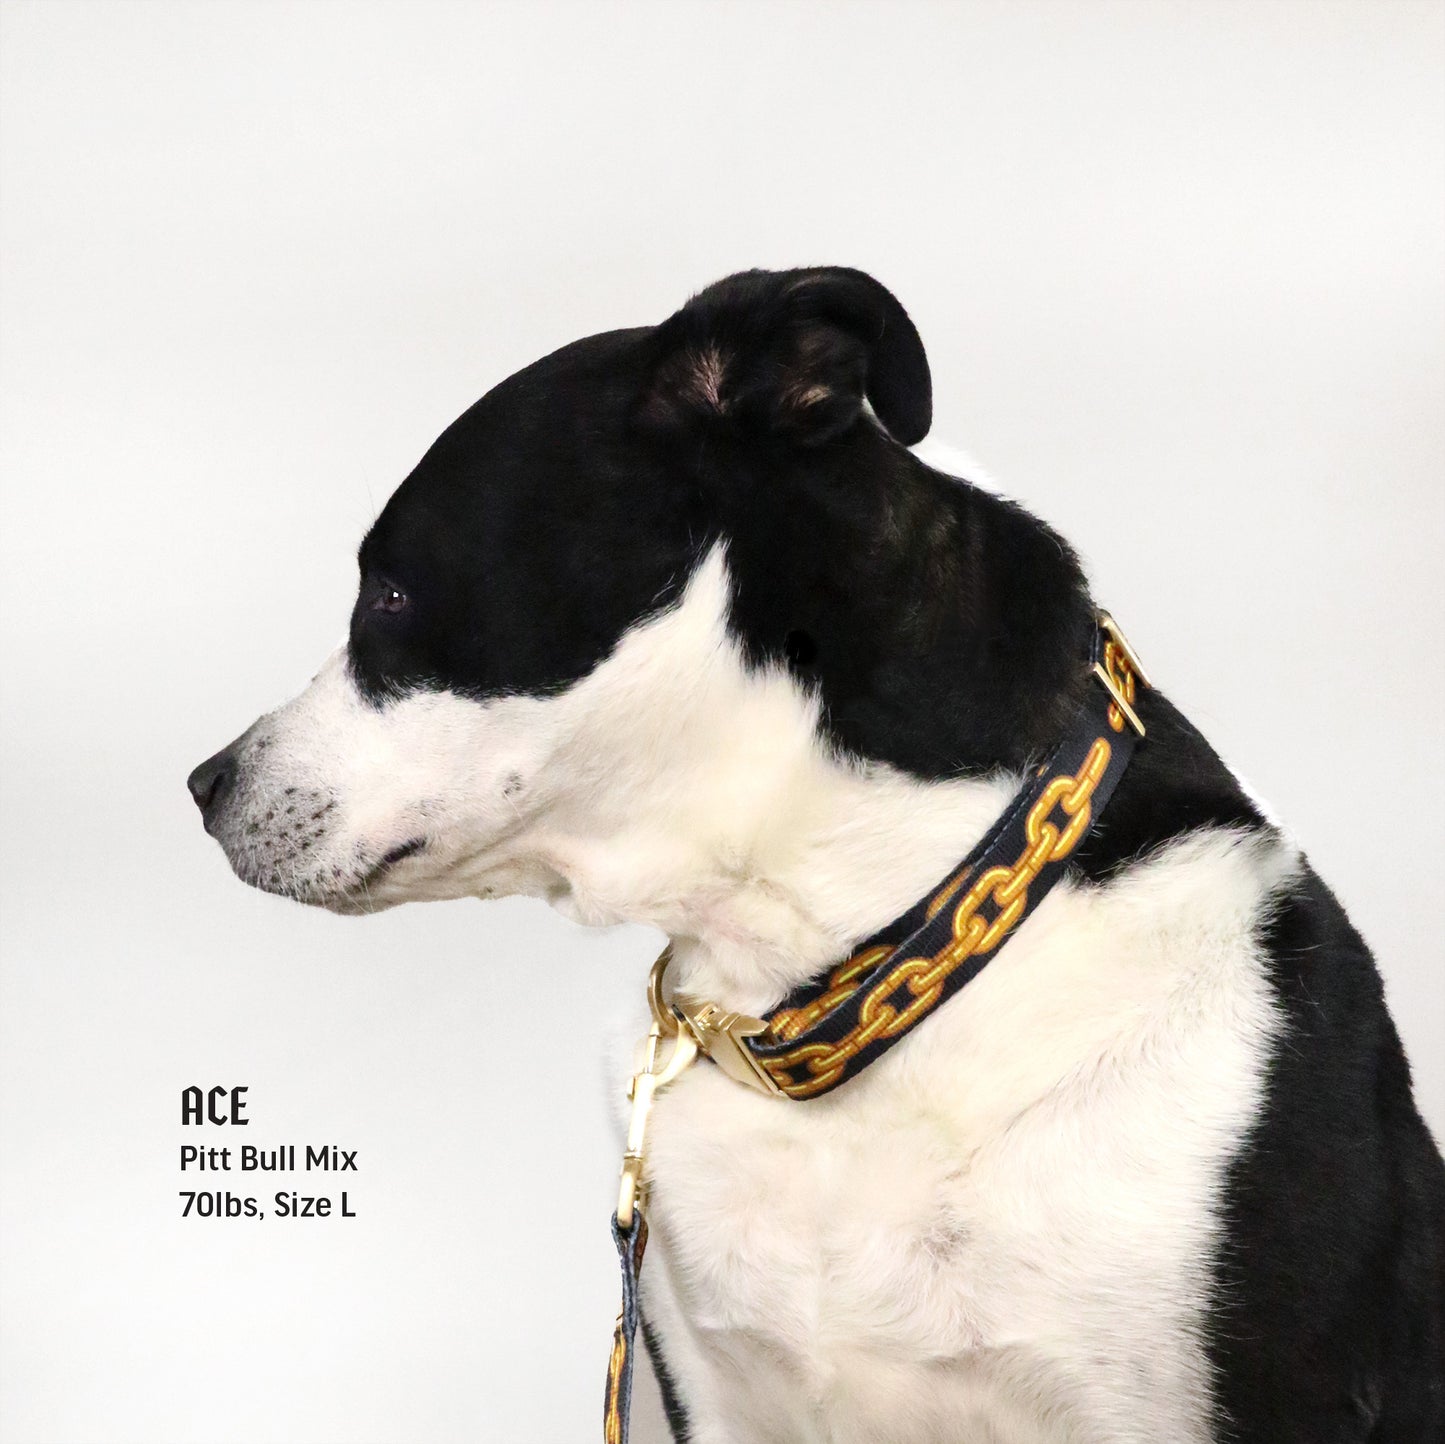 Ace the Pitt Bull Mix wearing the Off the Chain Deluxe Pet Collar in size Large.